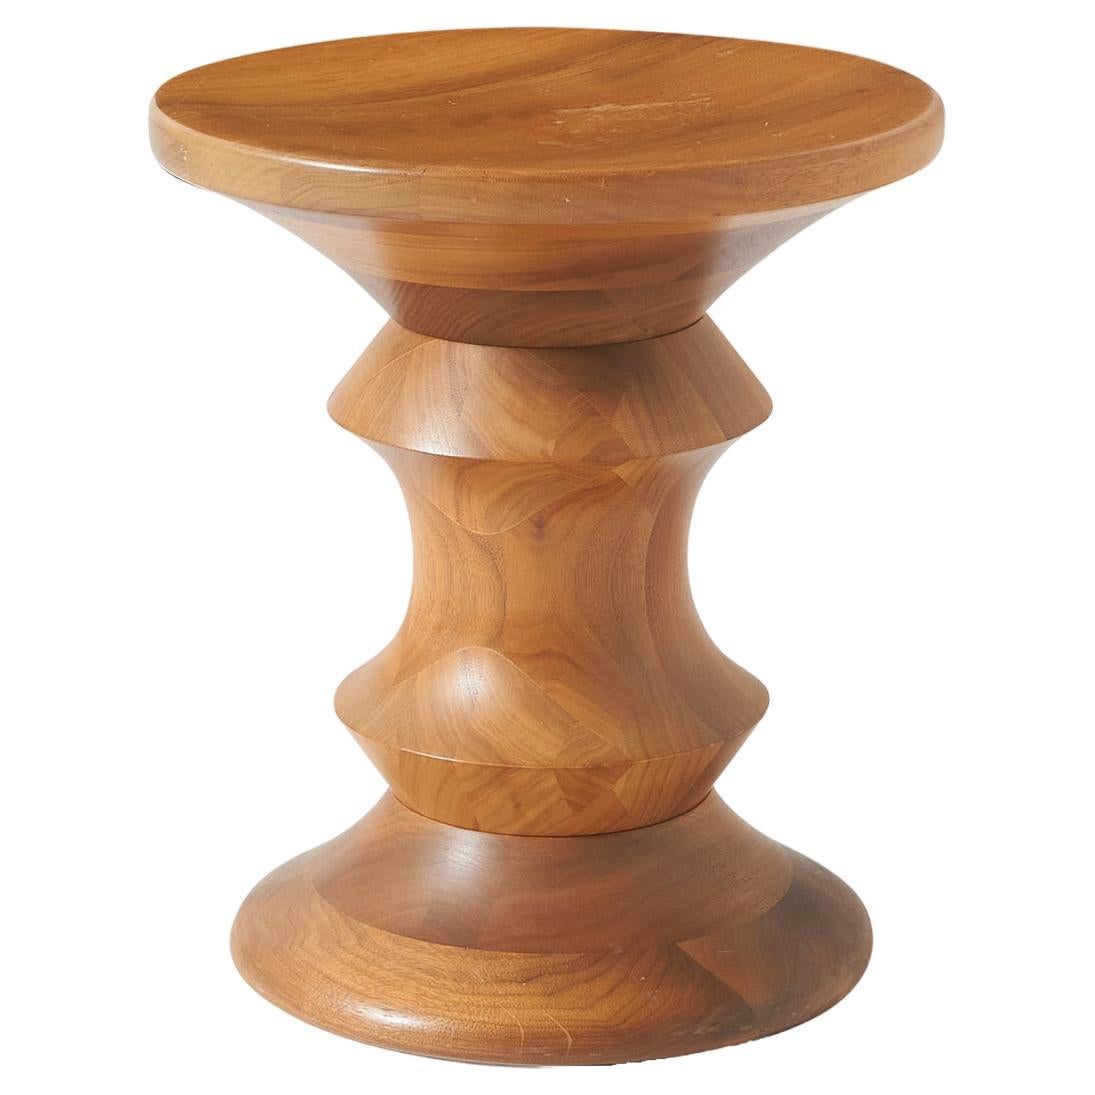 A Time Life stool by Charles and Ray  For Sale